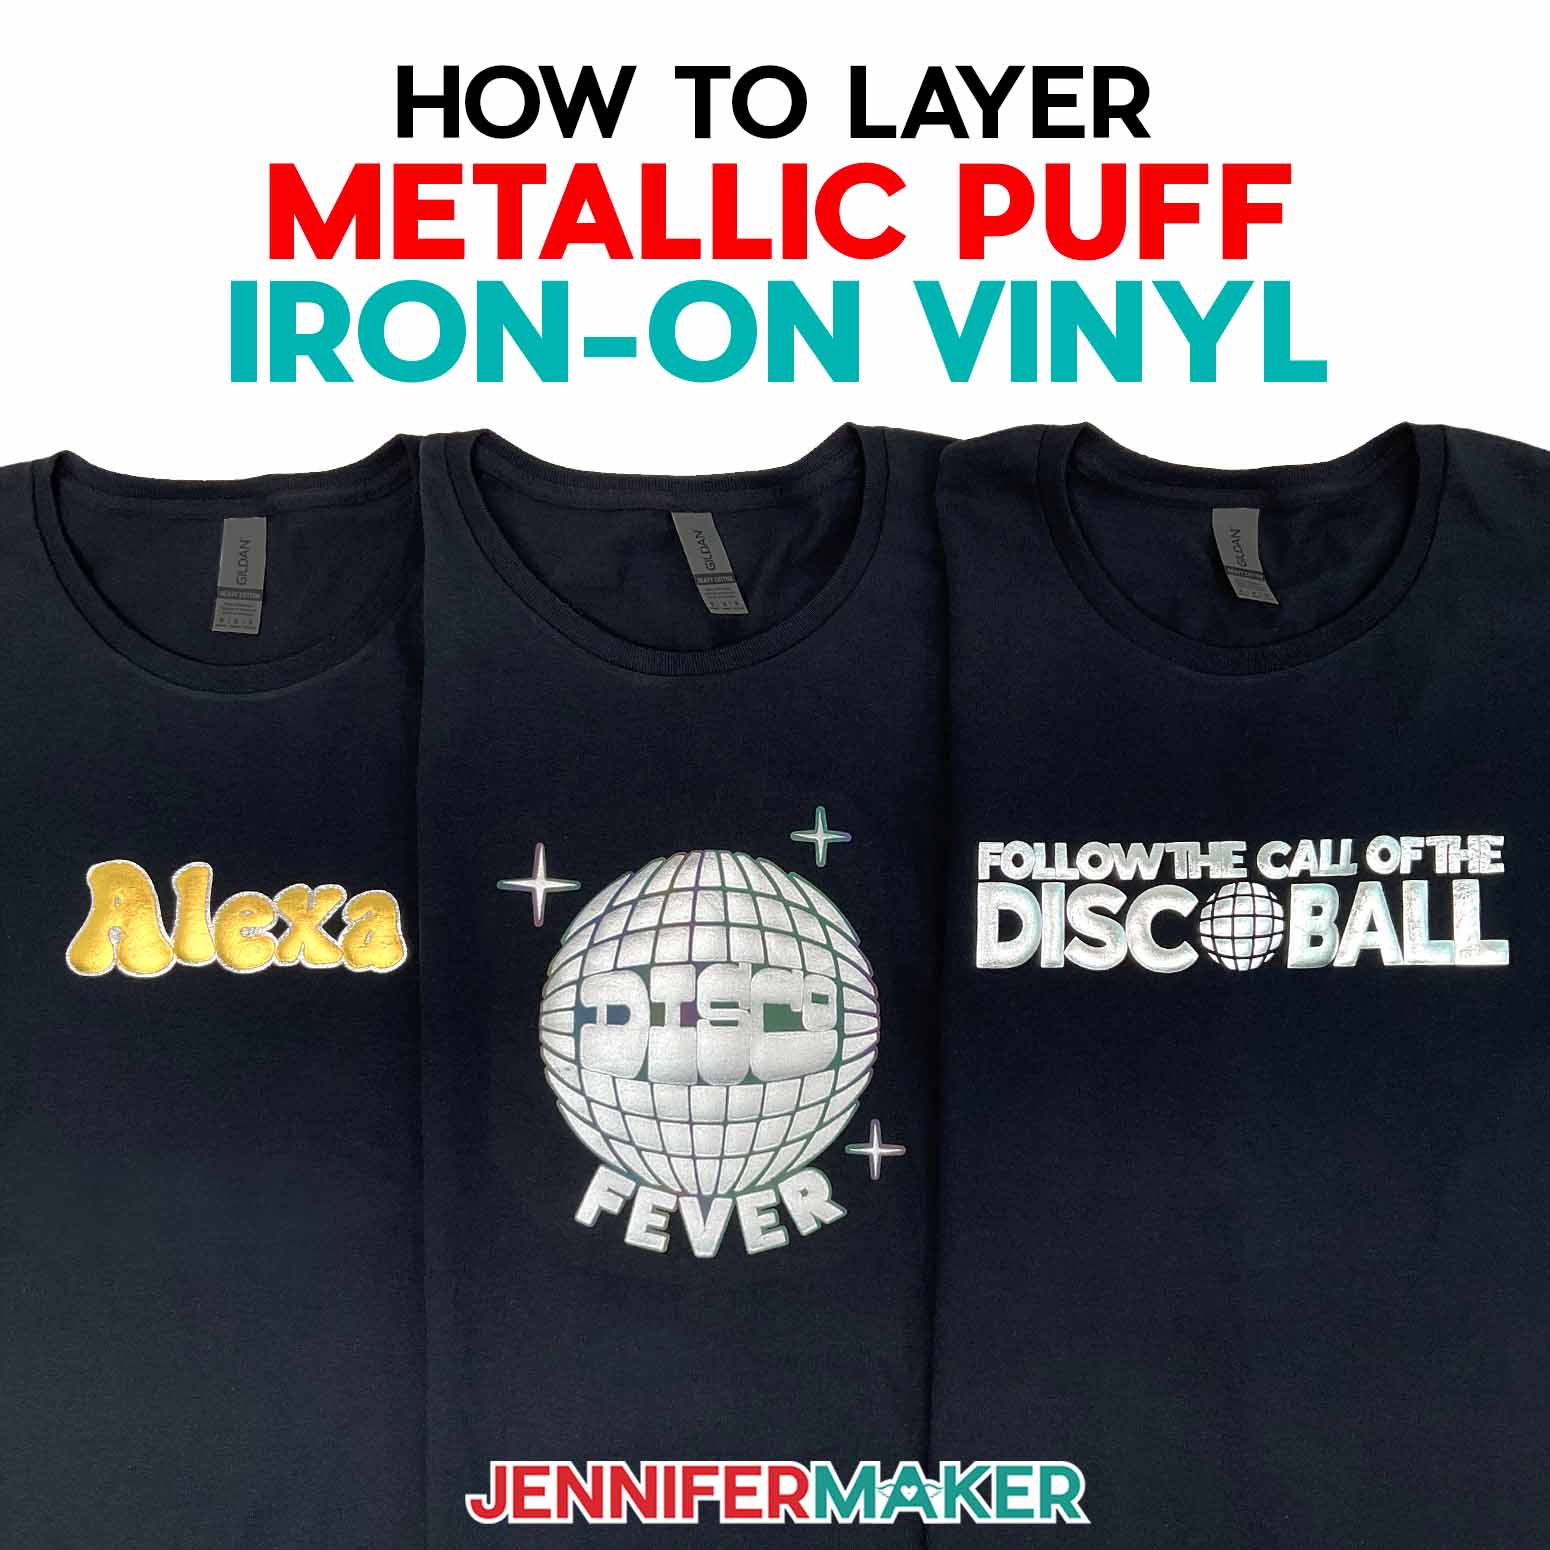 How To Transfer Metallic Puff Iron-On Vinyl For 3D Designs